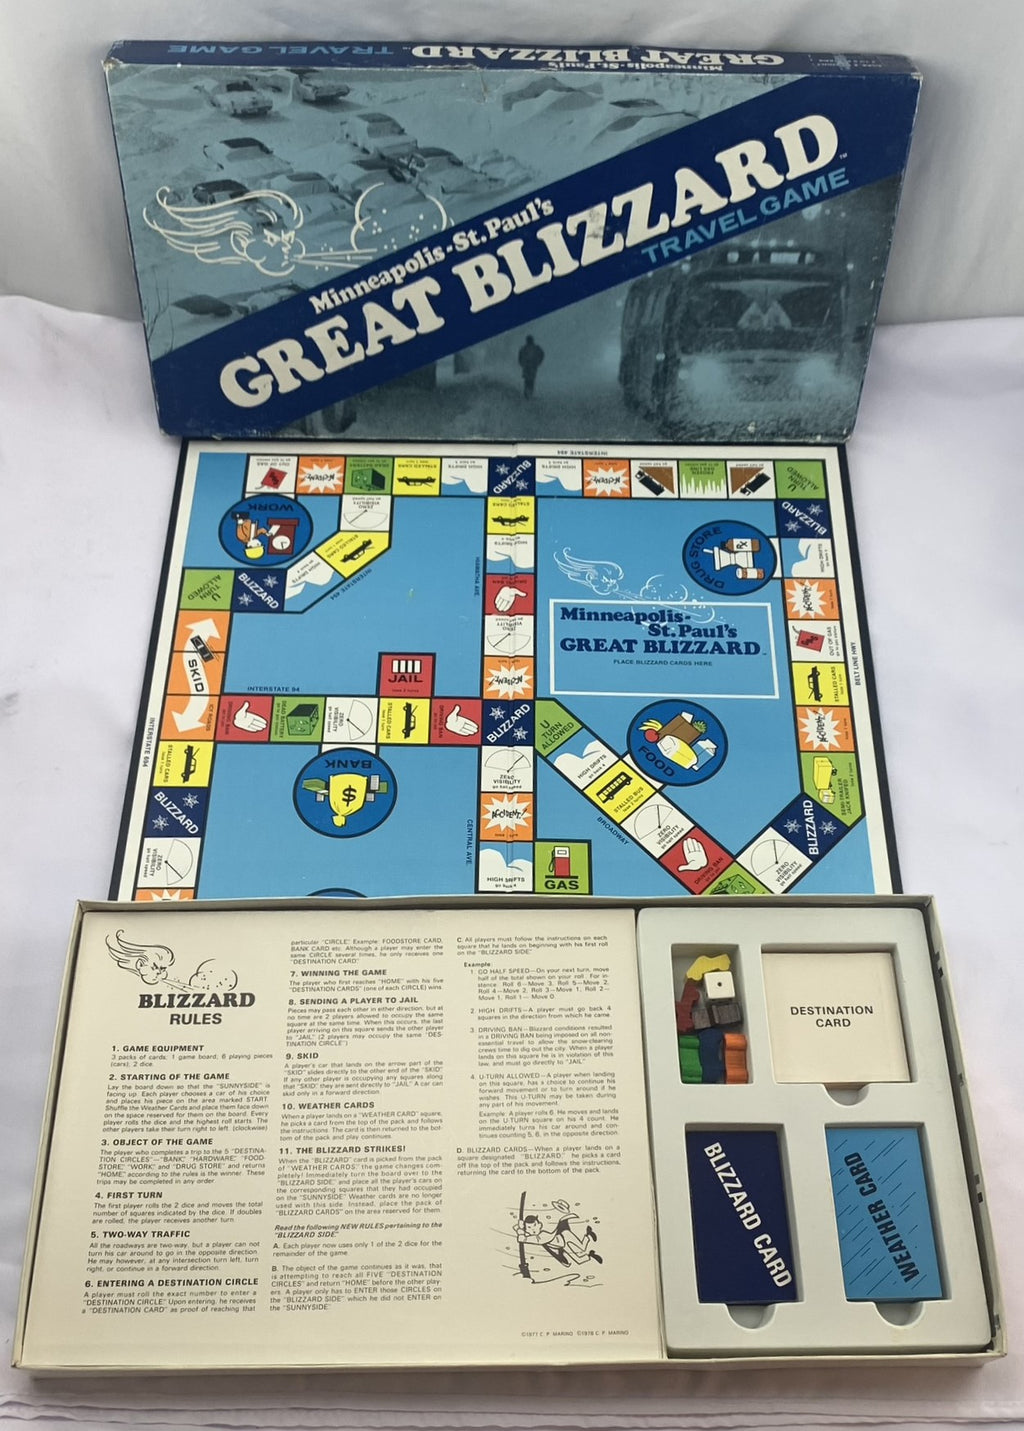 Minneapolis Great Blizzard of '77 Travel Game - 1977 - Good Condition